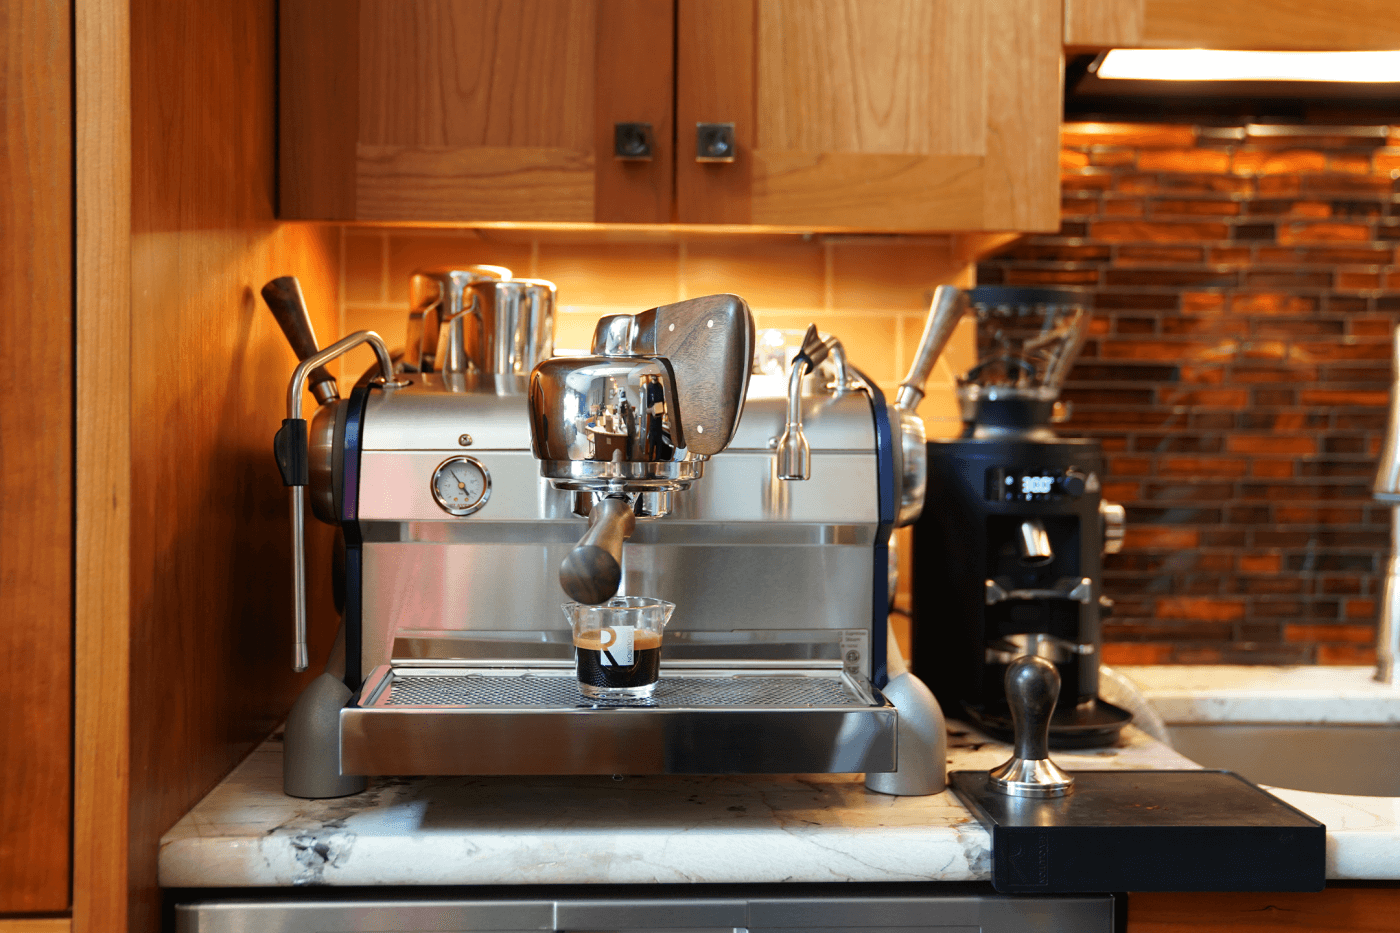 https://dropinblog.net/34252234/files/Visions-Blog-buyers-guide-small-office-coffee-equipment-slayer-single-group-espresso-machine.png